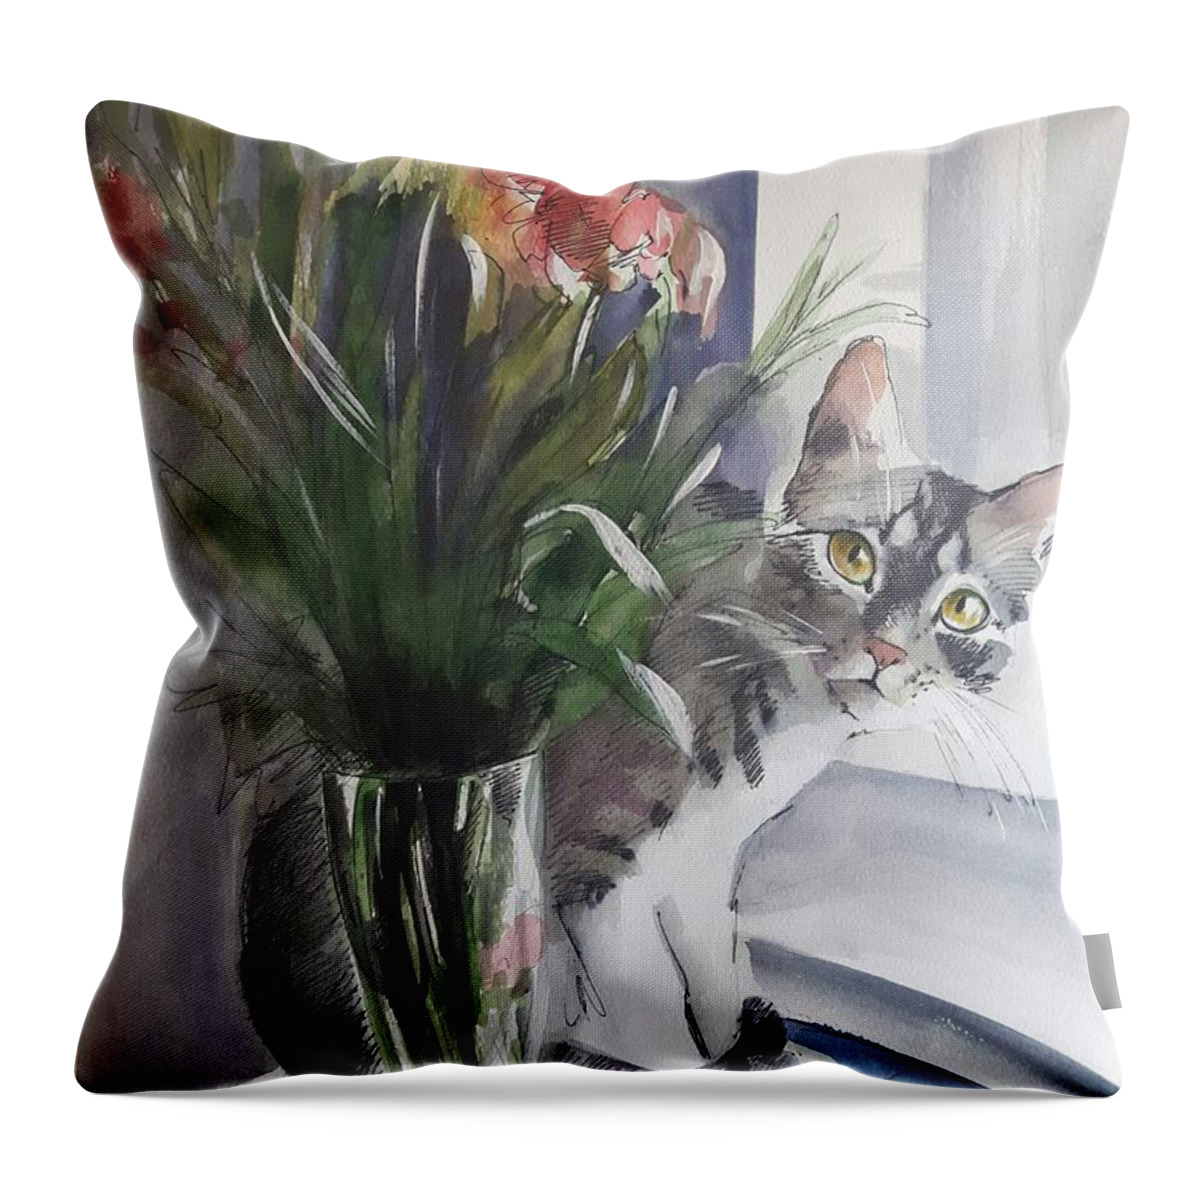 Cat Throw Pillow featuring the painting Do you see me? Pet portrait in watercolor .Modern cat art with flowers by Vali Irina Ciobanu